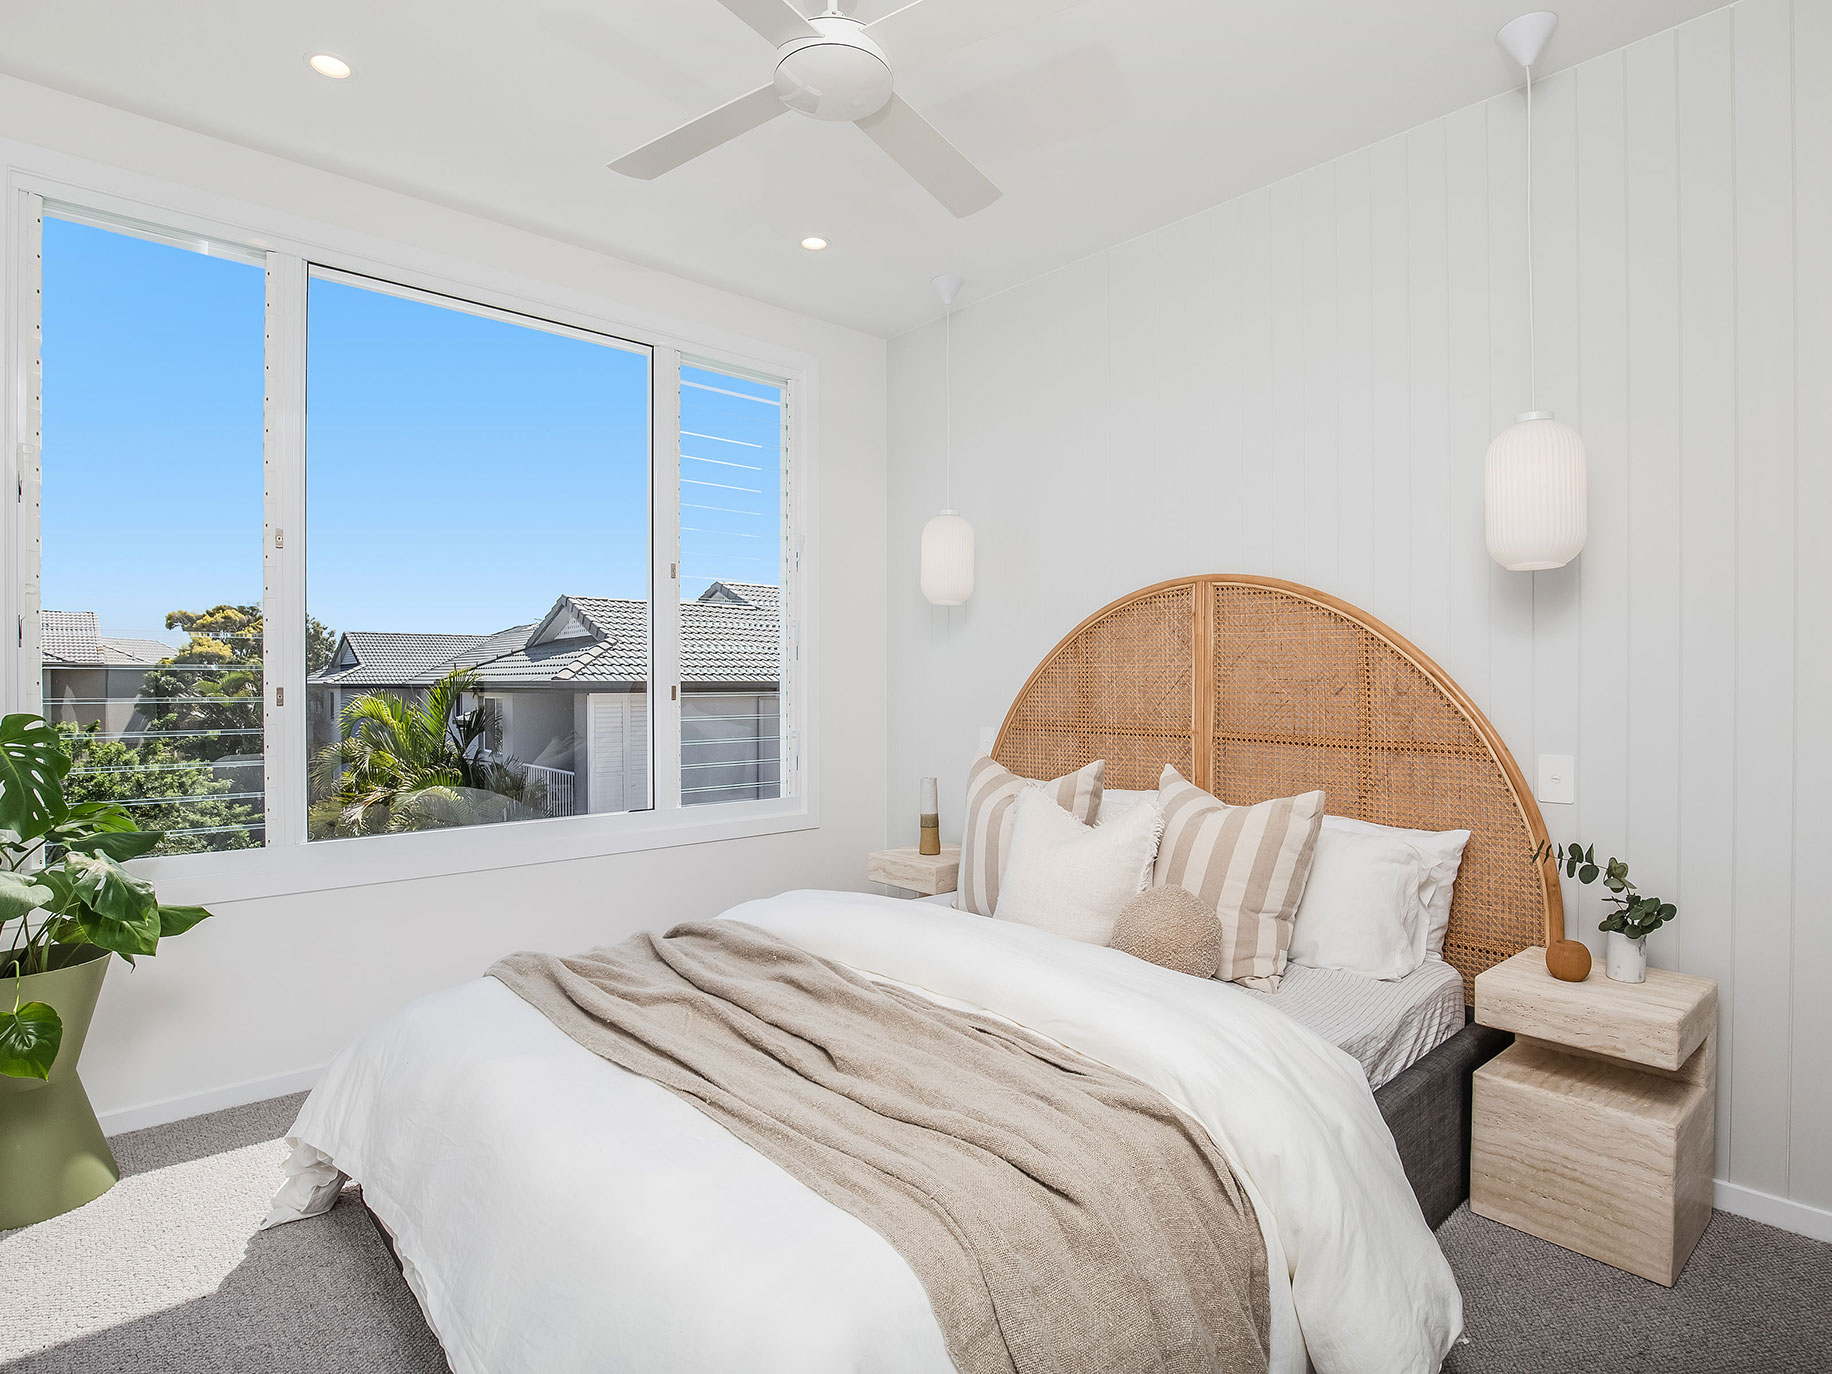 The master bedroom is bright an airy